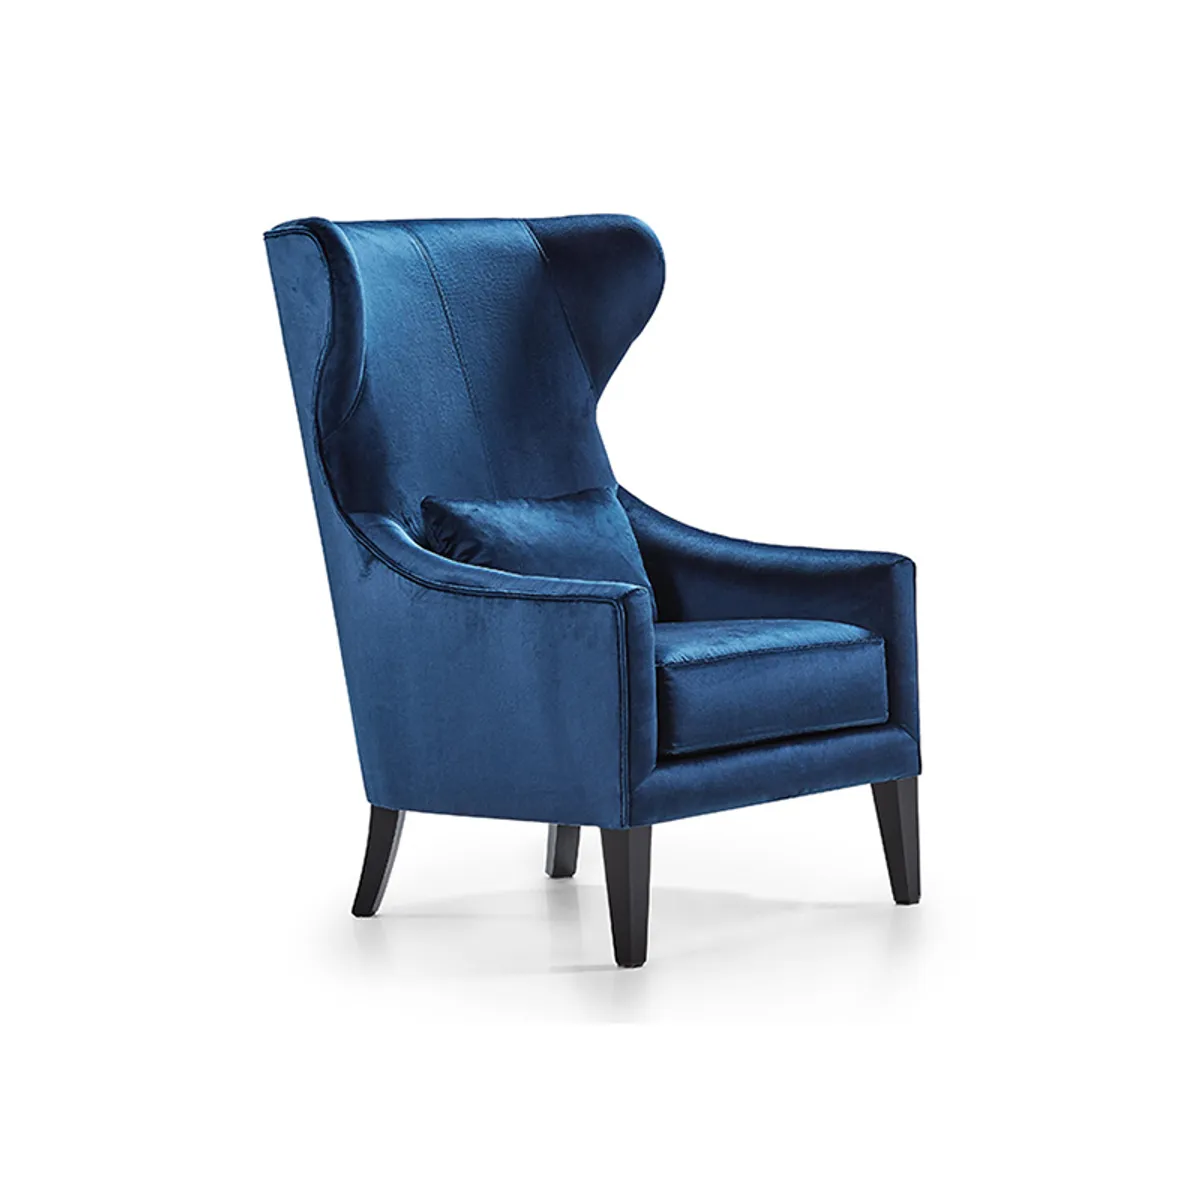 Vala Wing Back Chair Furniture For Boutique Restaurants And Cafes 1915